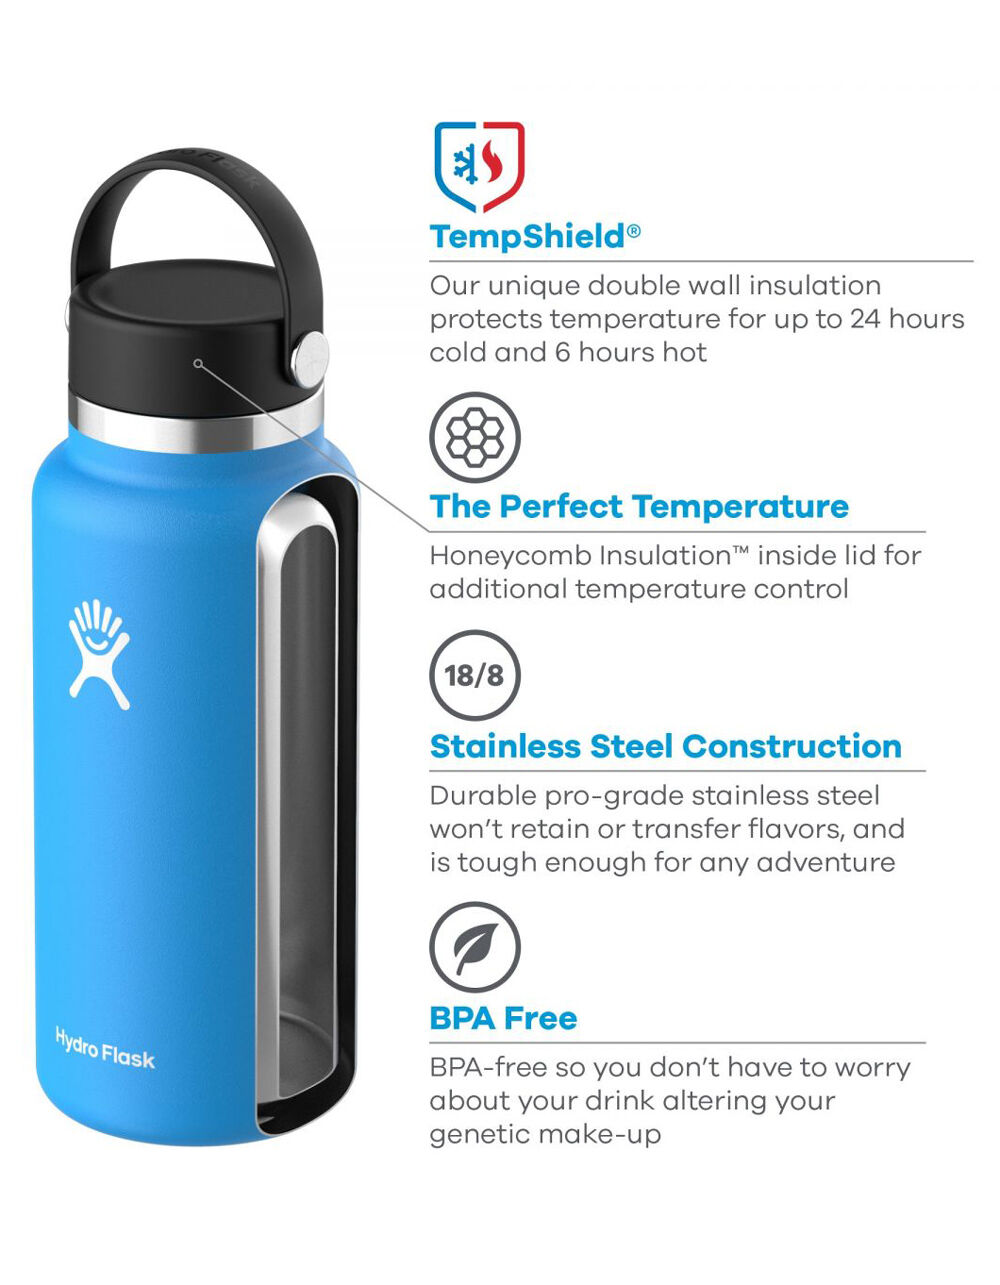 HYDRO FLASK 32 oz Wide Mouth Water Bottle image number 2